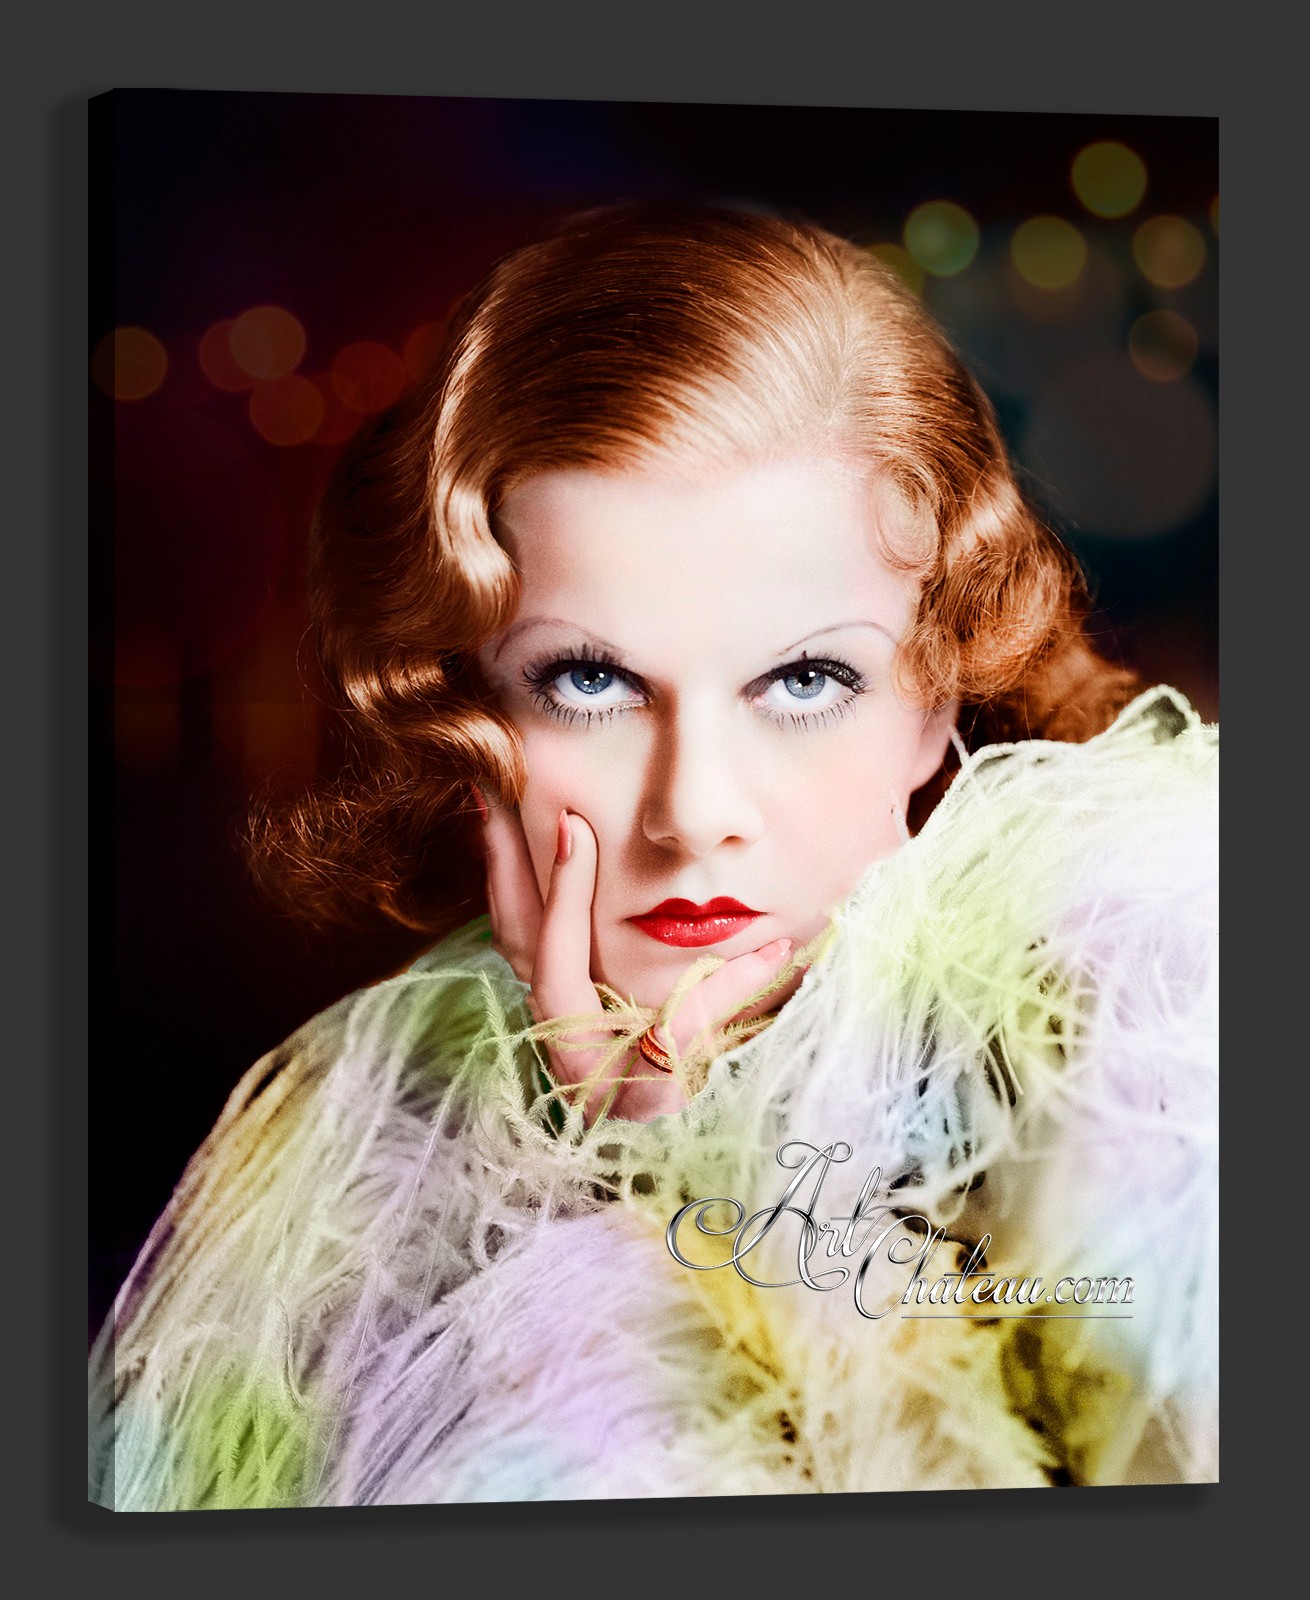 Jean Harlow, after Art Deco Photograph by George Hurrell